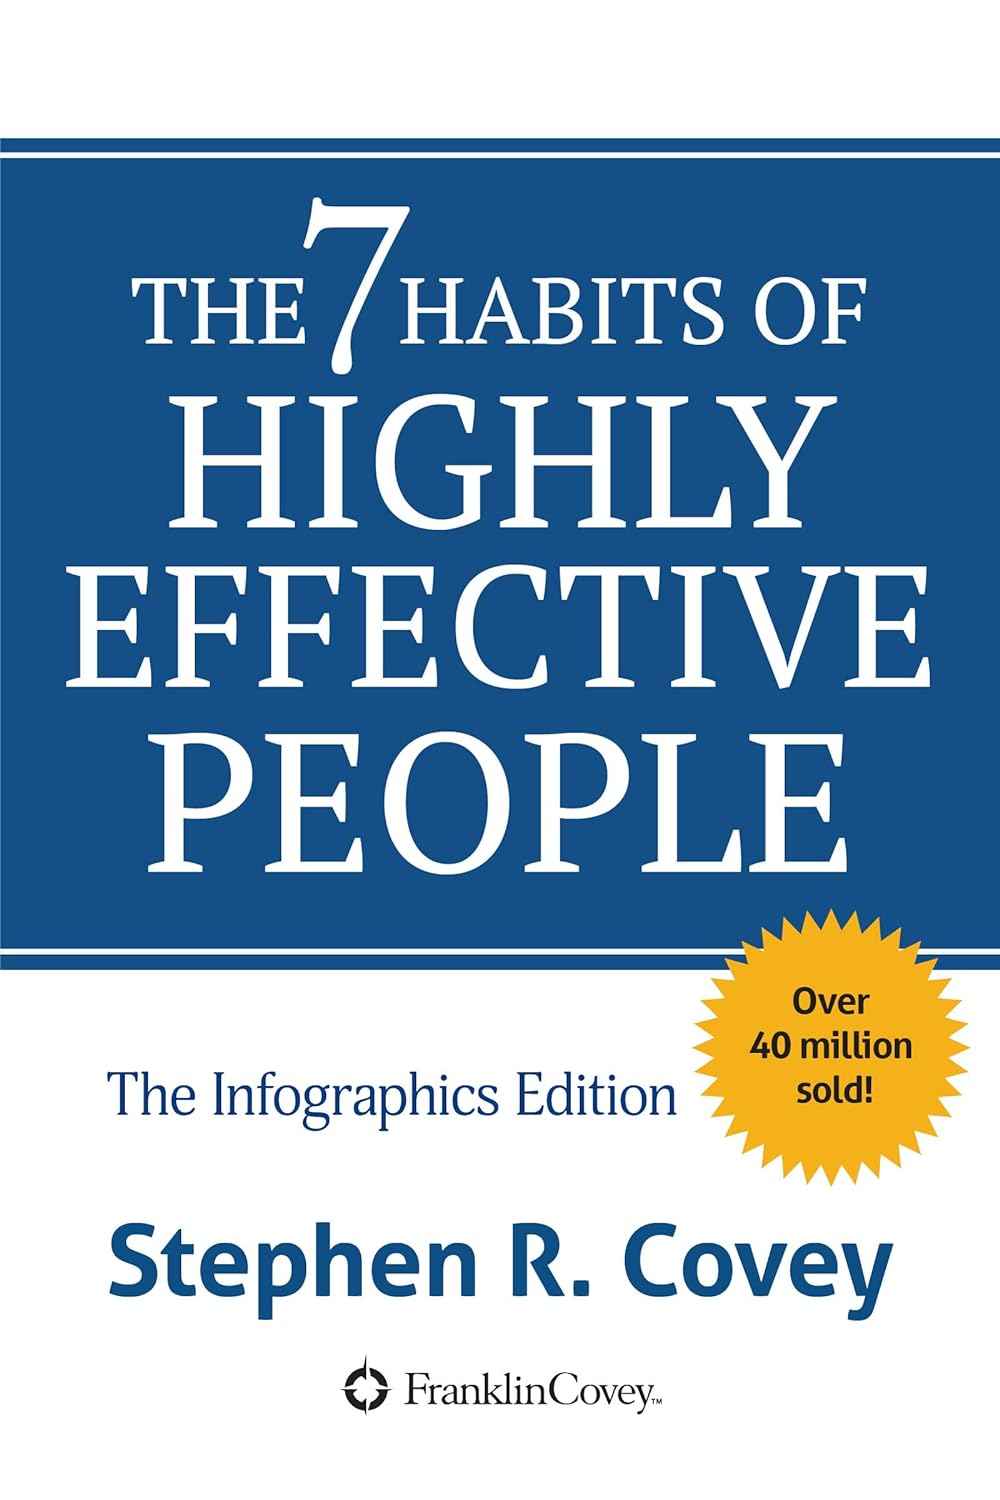 The 7 Habits of Highly Effective People, Steven R Covey_2_11zon